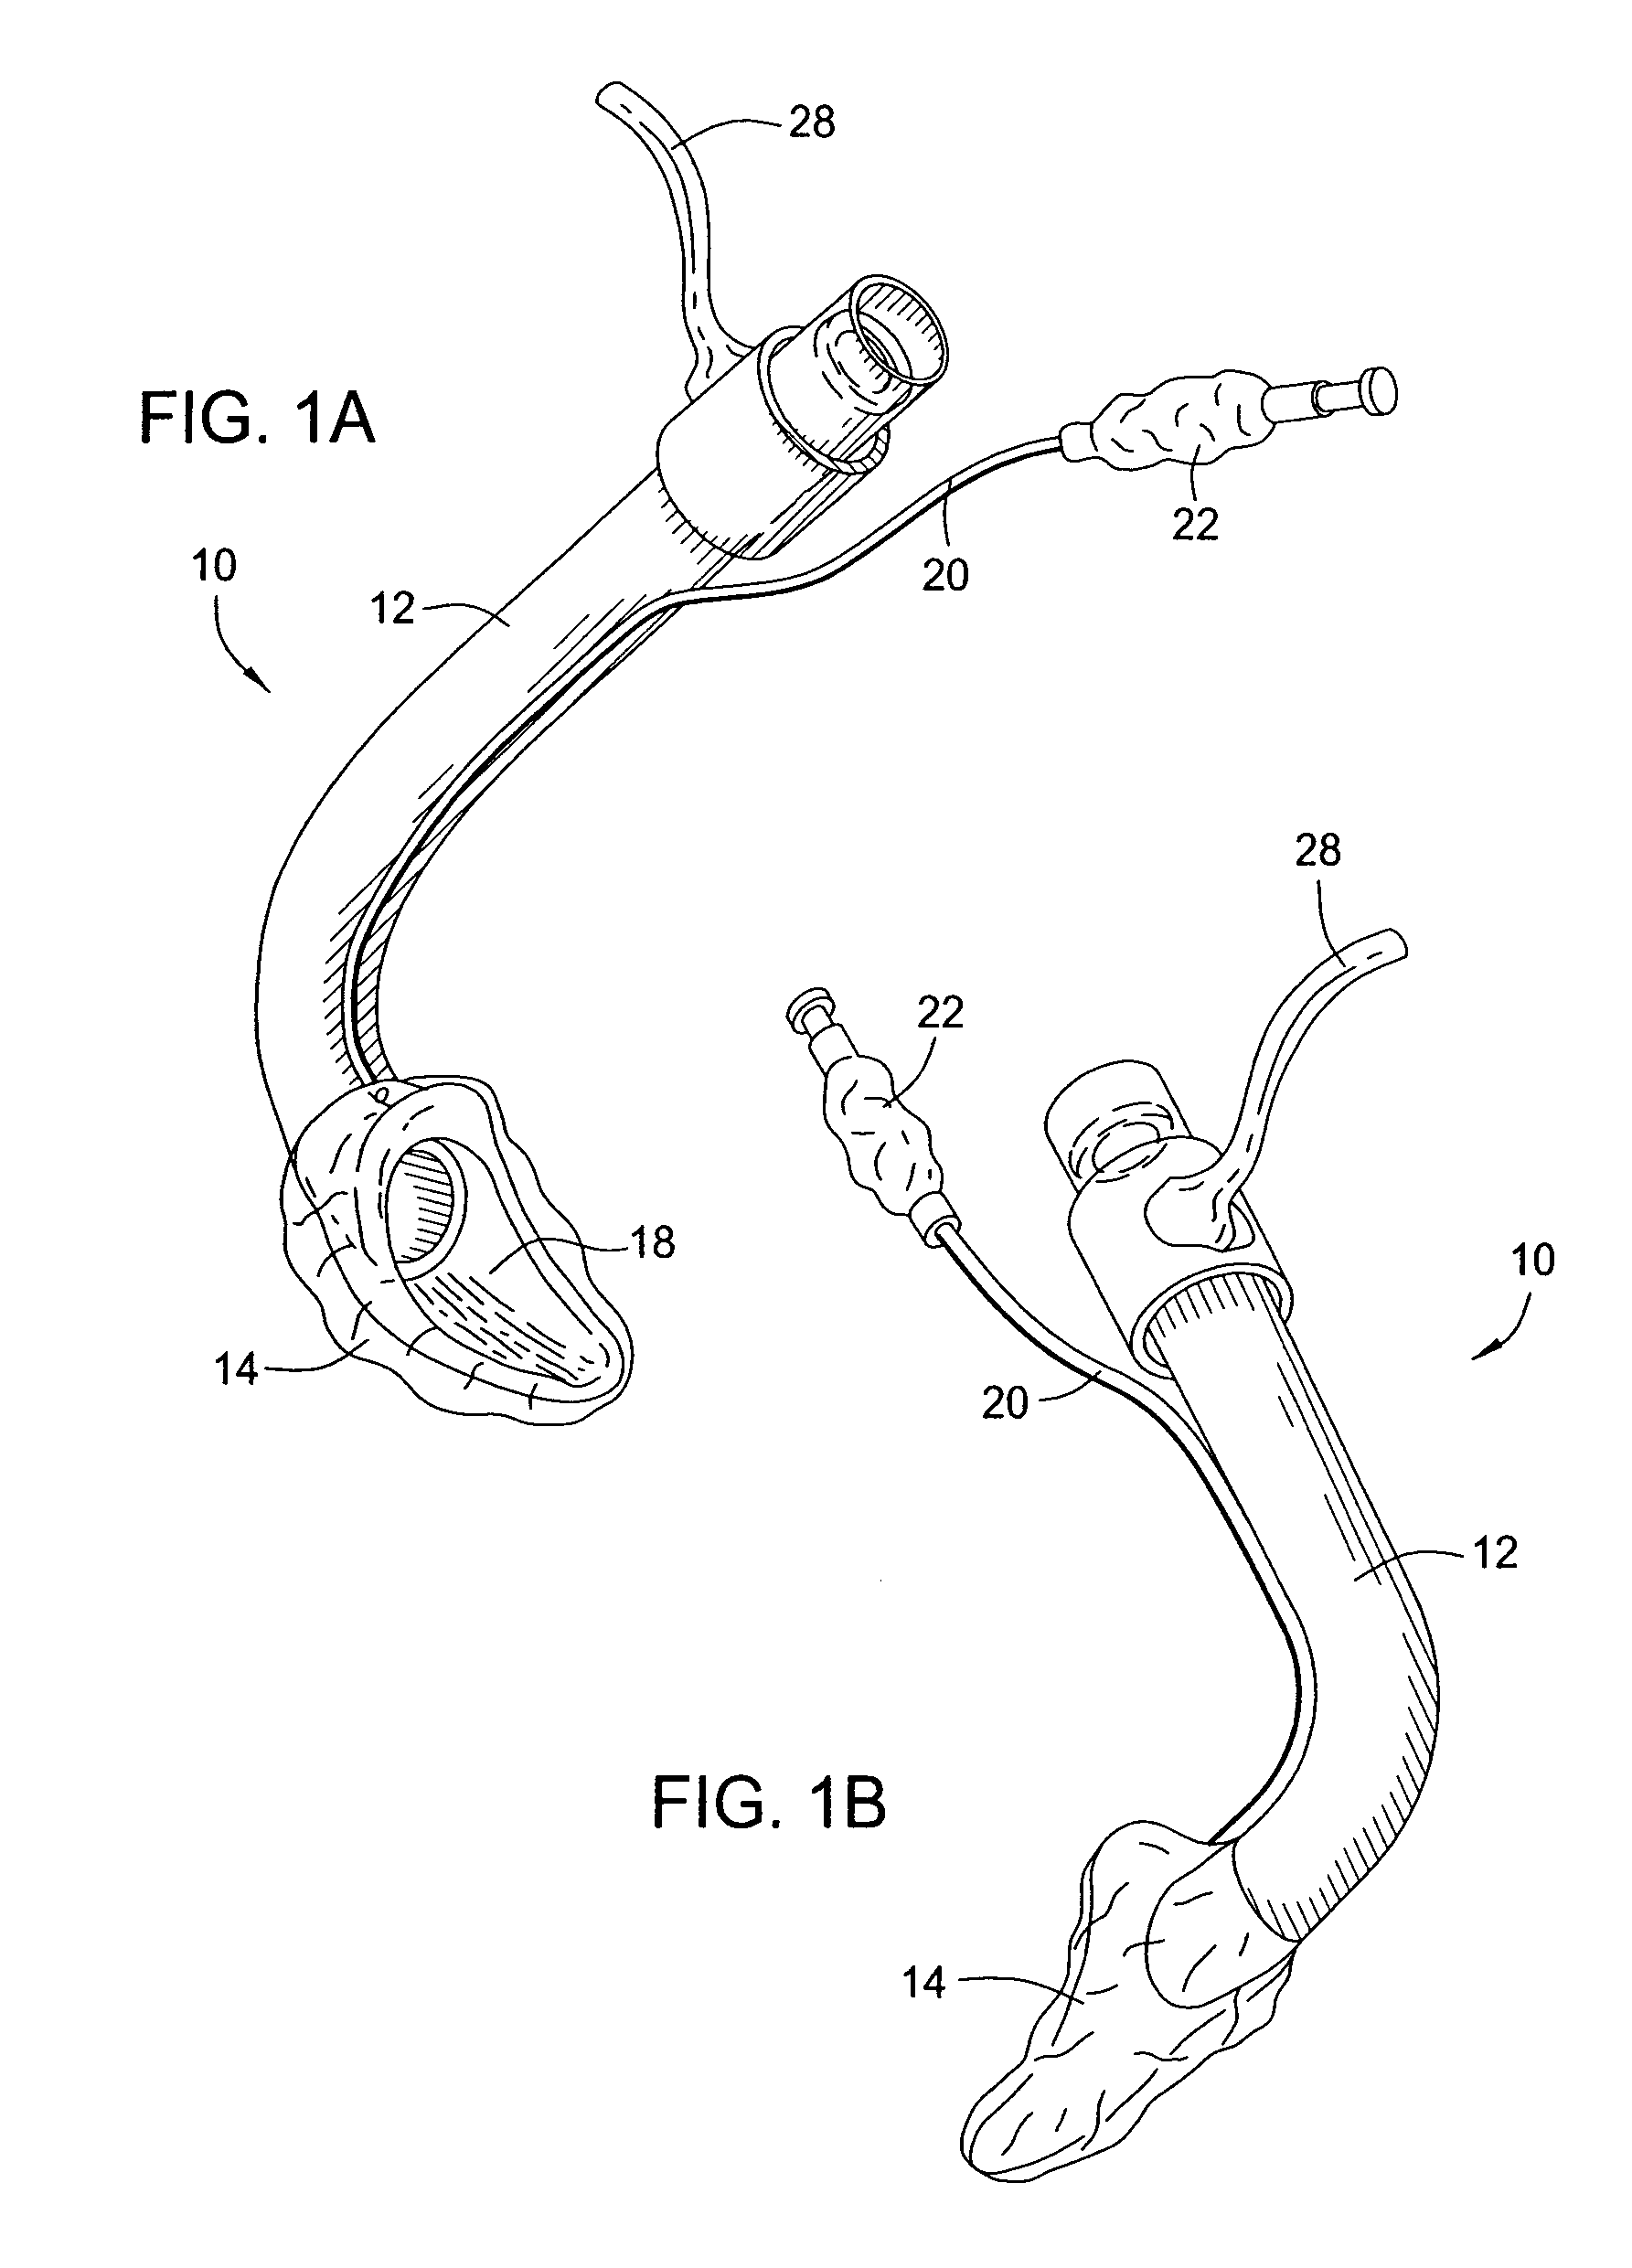 Device for insertion of endotracheal tube